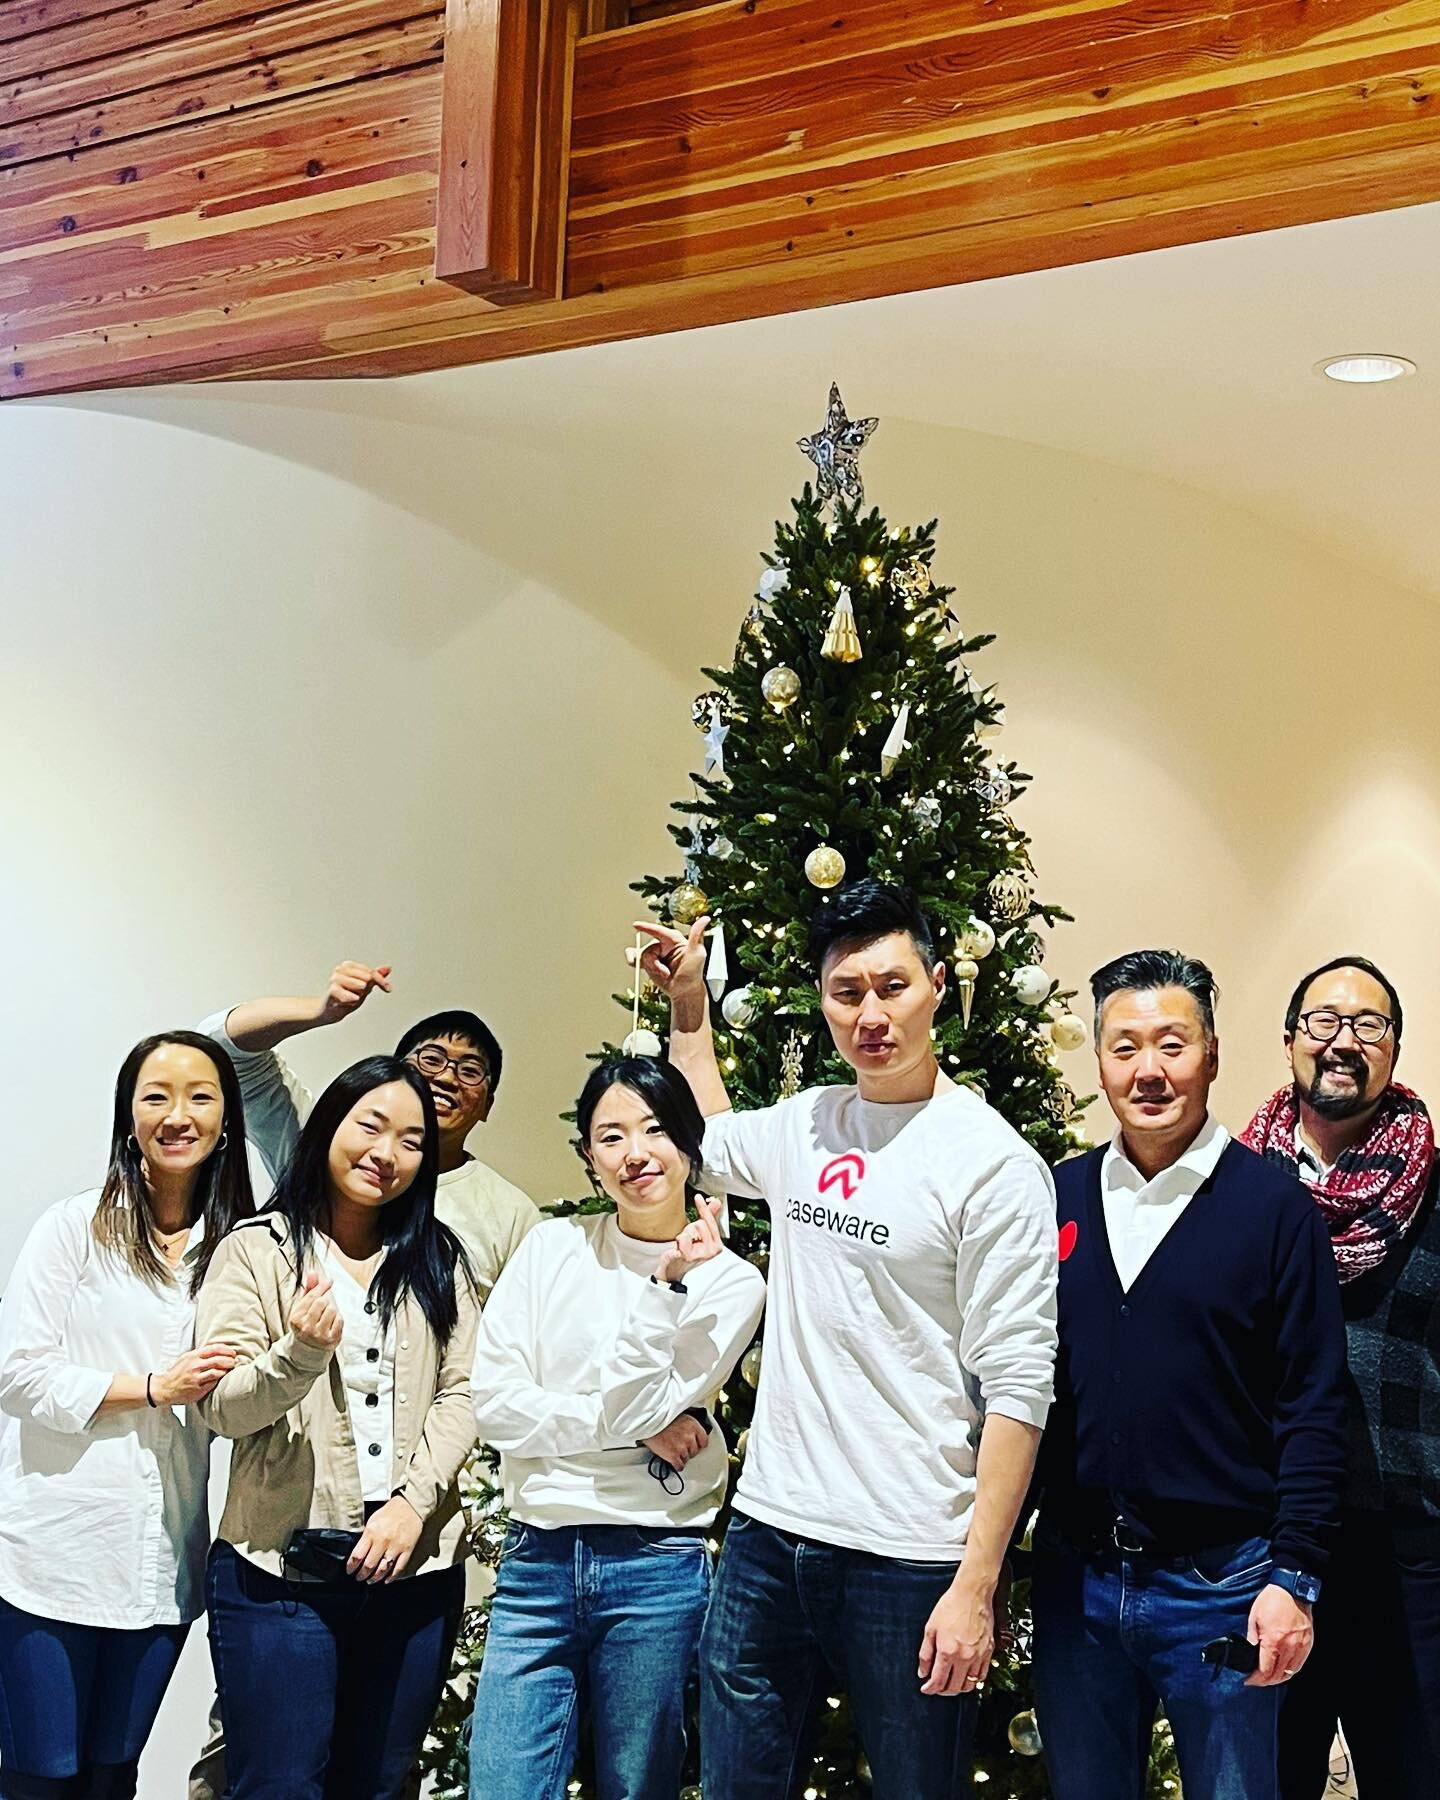 Action packed First Advent Sunday!! We are beyond grateful for all the blessings and this wonderful community @downsviewpc #downsviewpresbyterianchurch#전교인찬양제#englishministry #torontochristians#christmastreedecorating